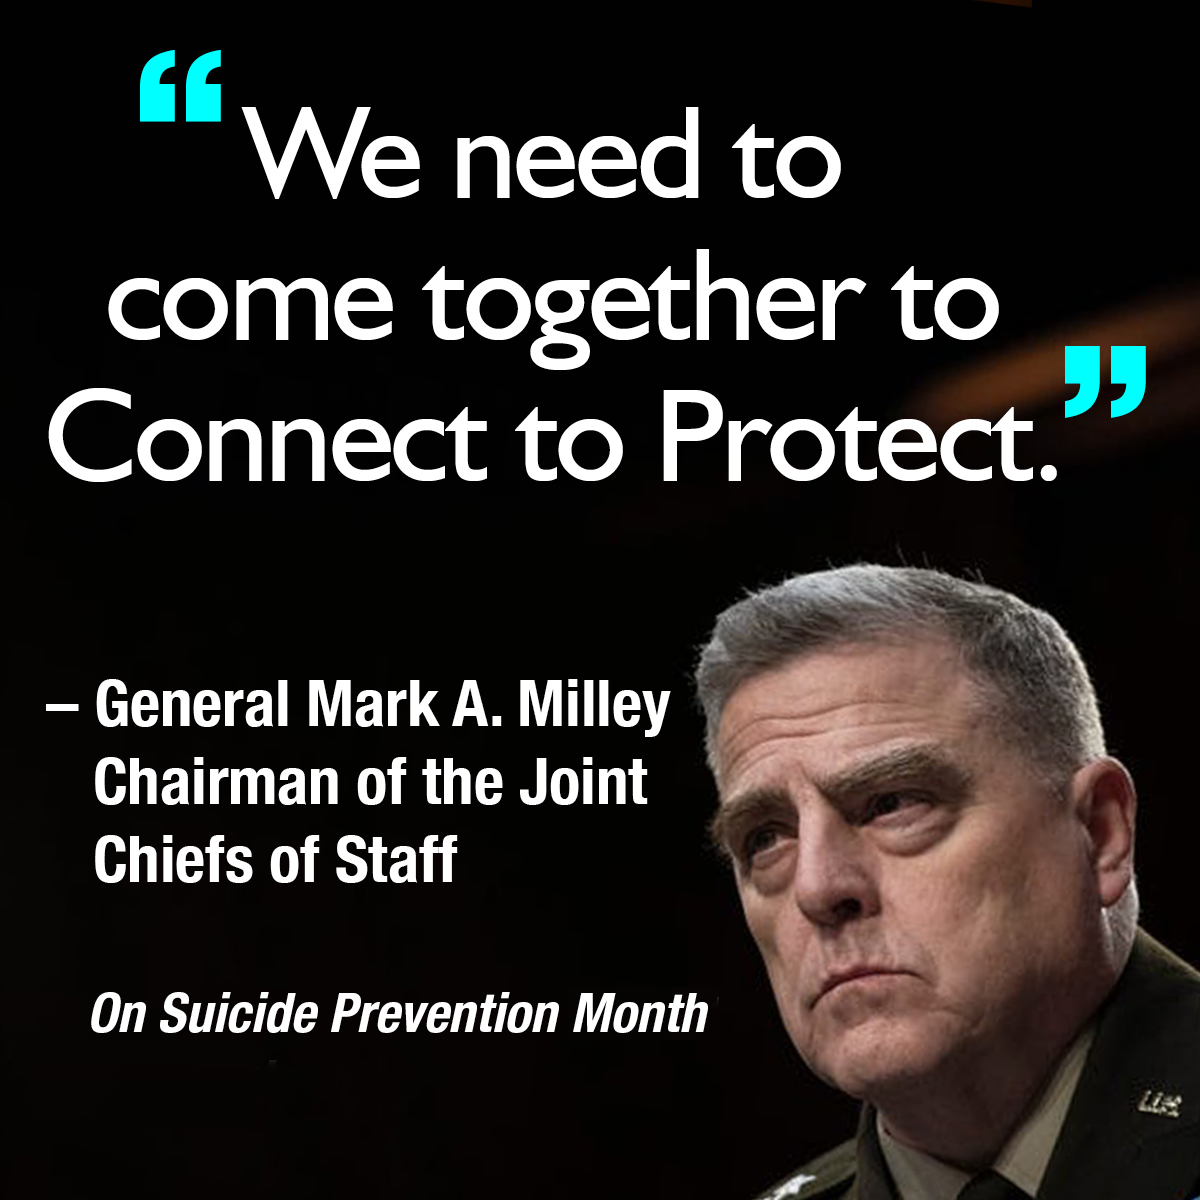 A quote on black screen featuring an image of Gen Mark A. milley